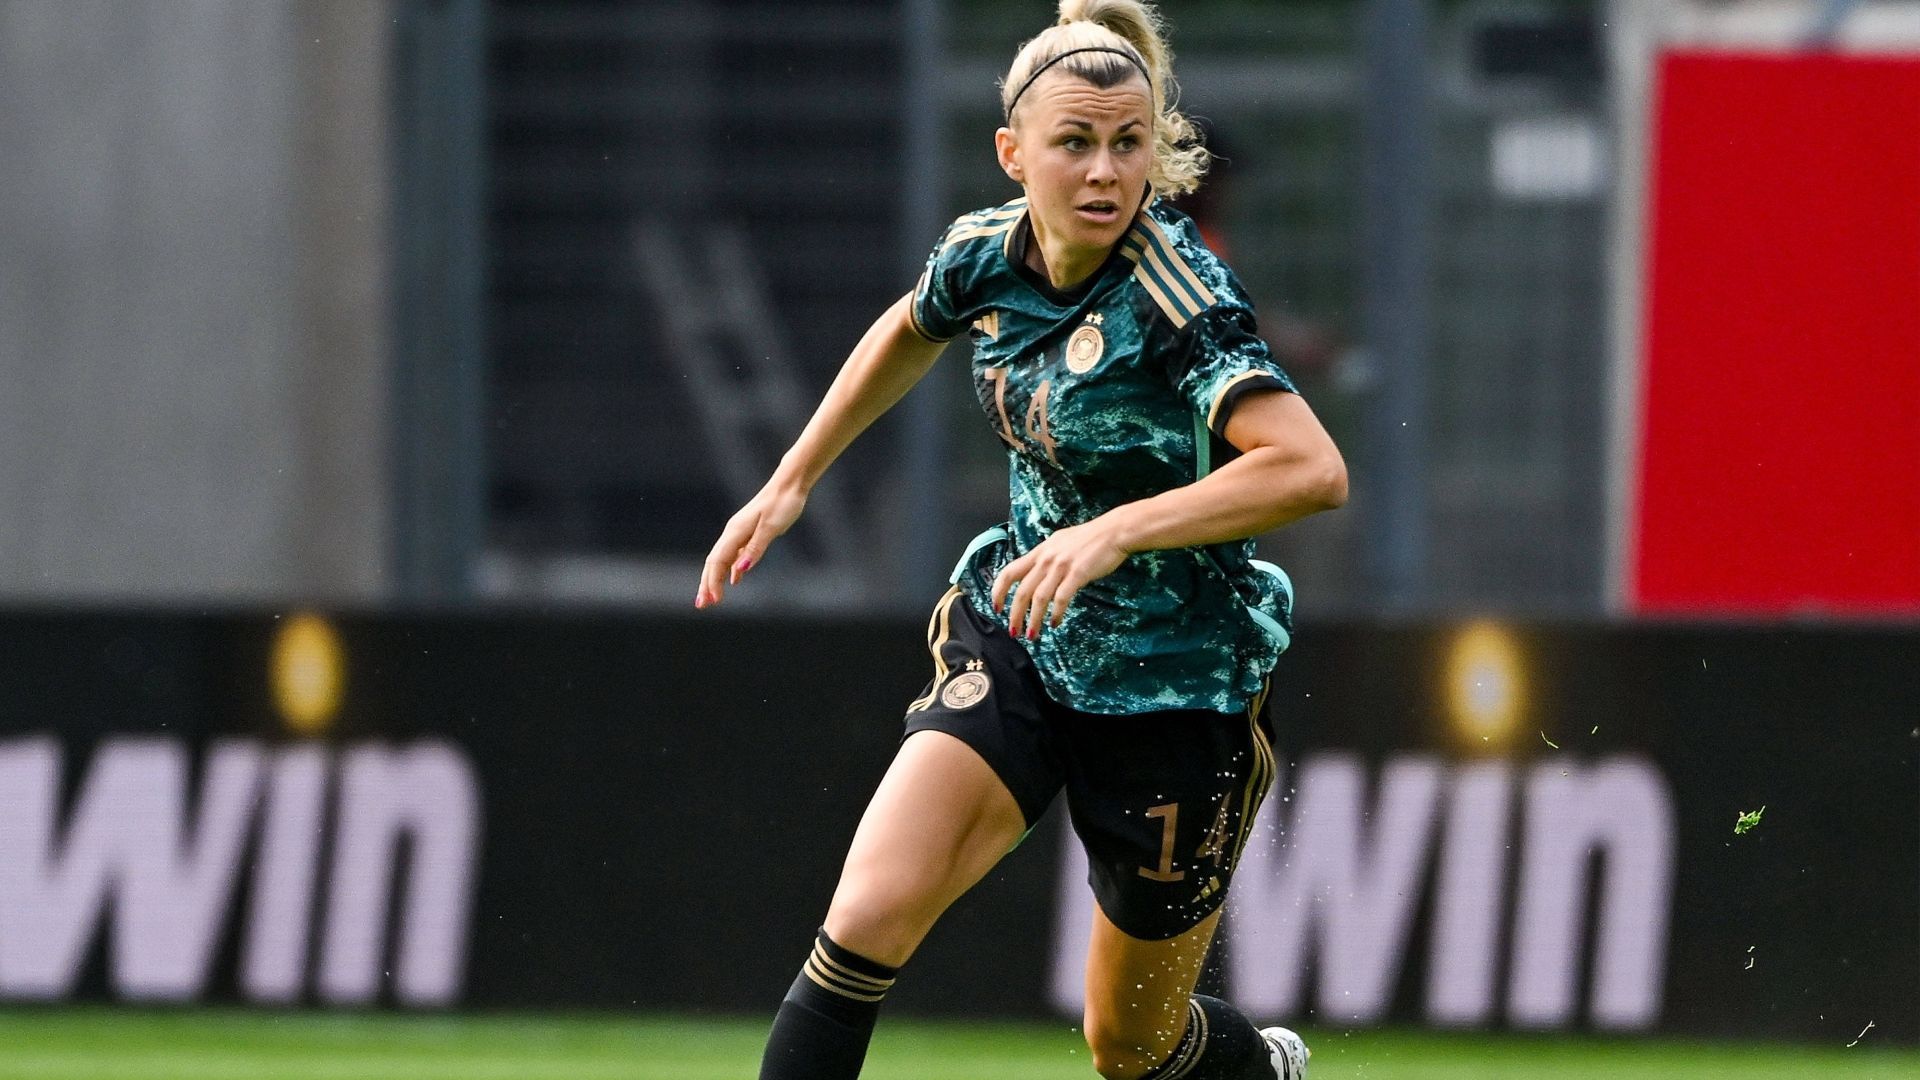 
                <strong>Lena Lattwein</strong><br>
                &#x2022; <strong>Position: </strong>Mittelfeld/Angriff<br>&#x2022; <strong>Verein: </strong>VfL Wolfsburg<br>&#x2022; <strong>Trikotnummer: </strong><br>&#x2022; <strong>Alter: </strong><br>&#x2022; <strong>Länderspiele: </strong><br>&#x2022; <strong>Länderspiel-Tore: </strong><br>
              